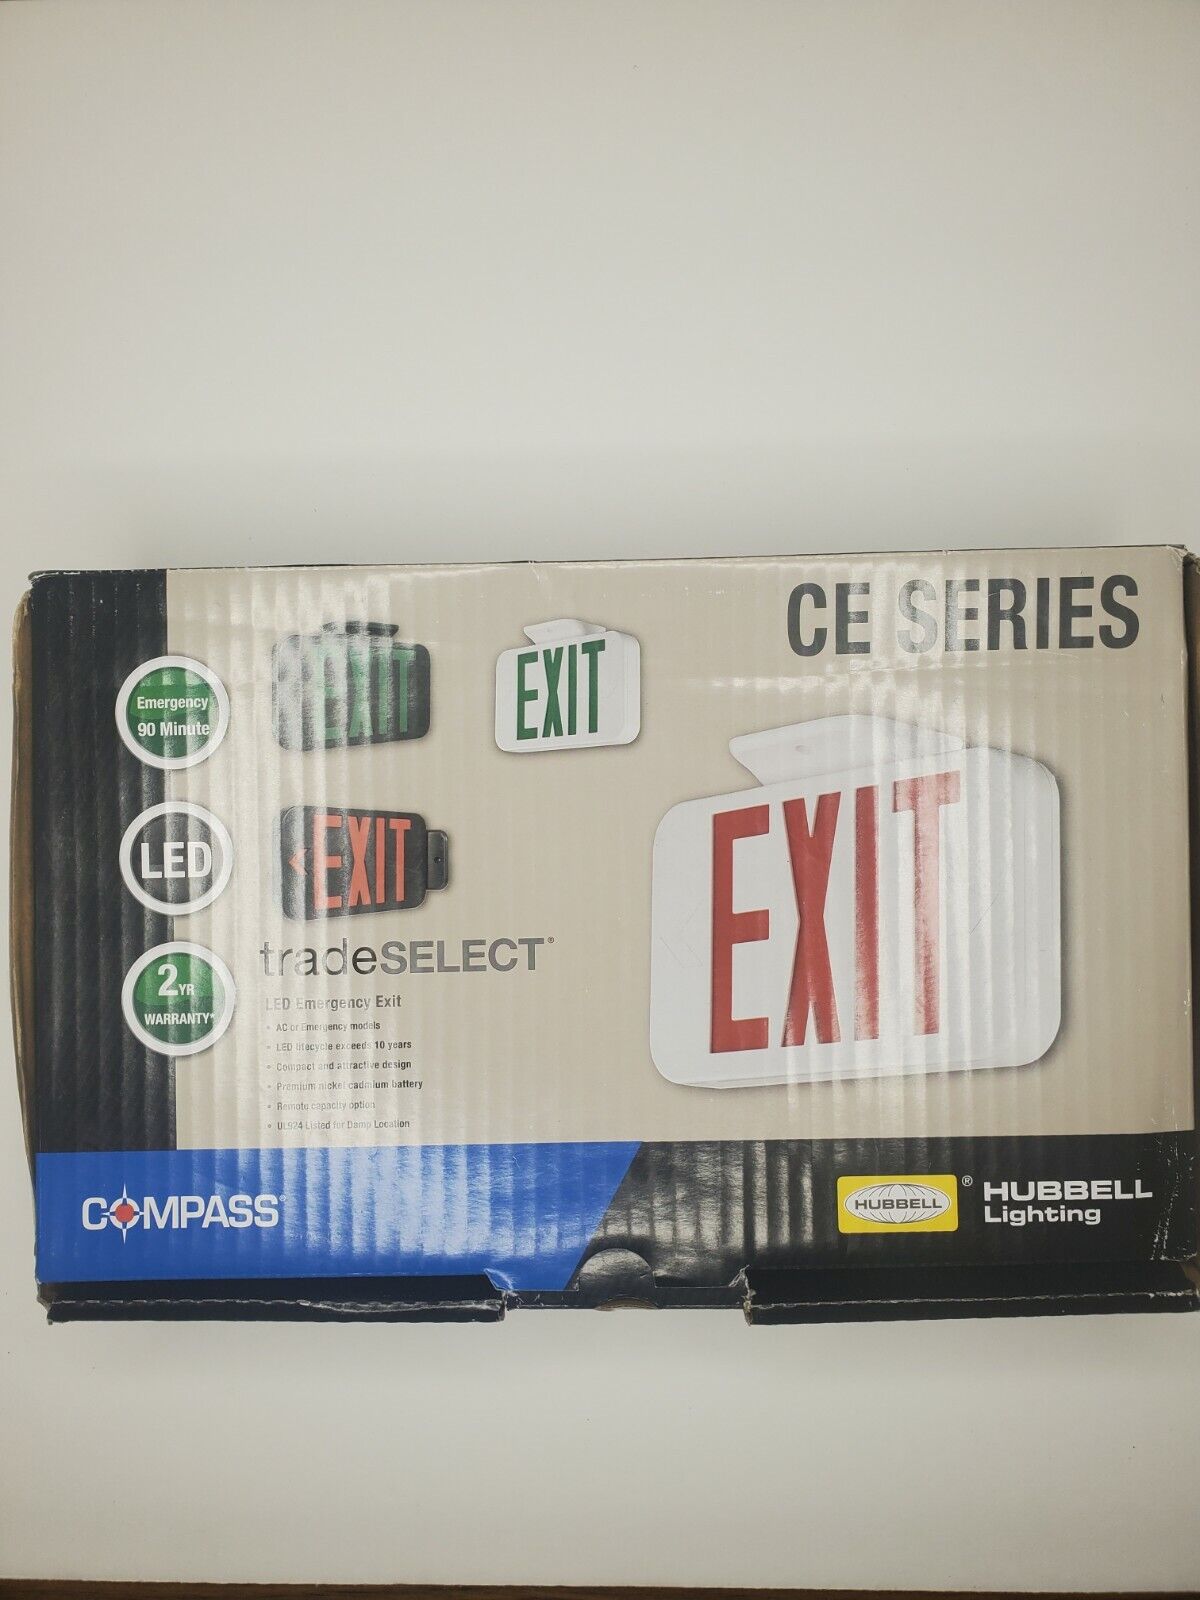 Compass By Hubbell CER Hubbell Lighting LED Emergency Exit Sign White